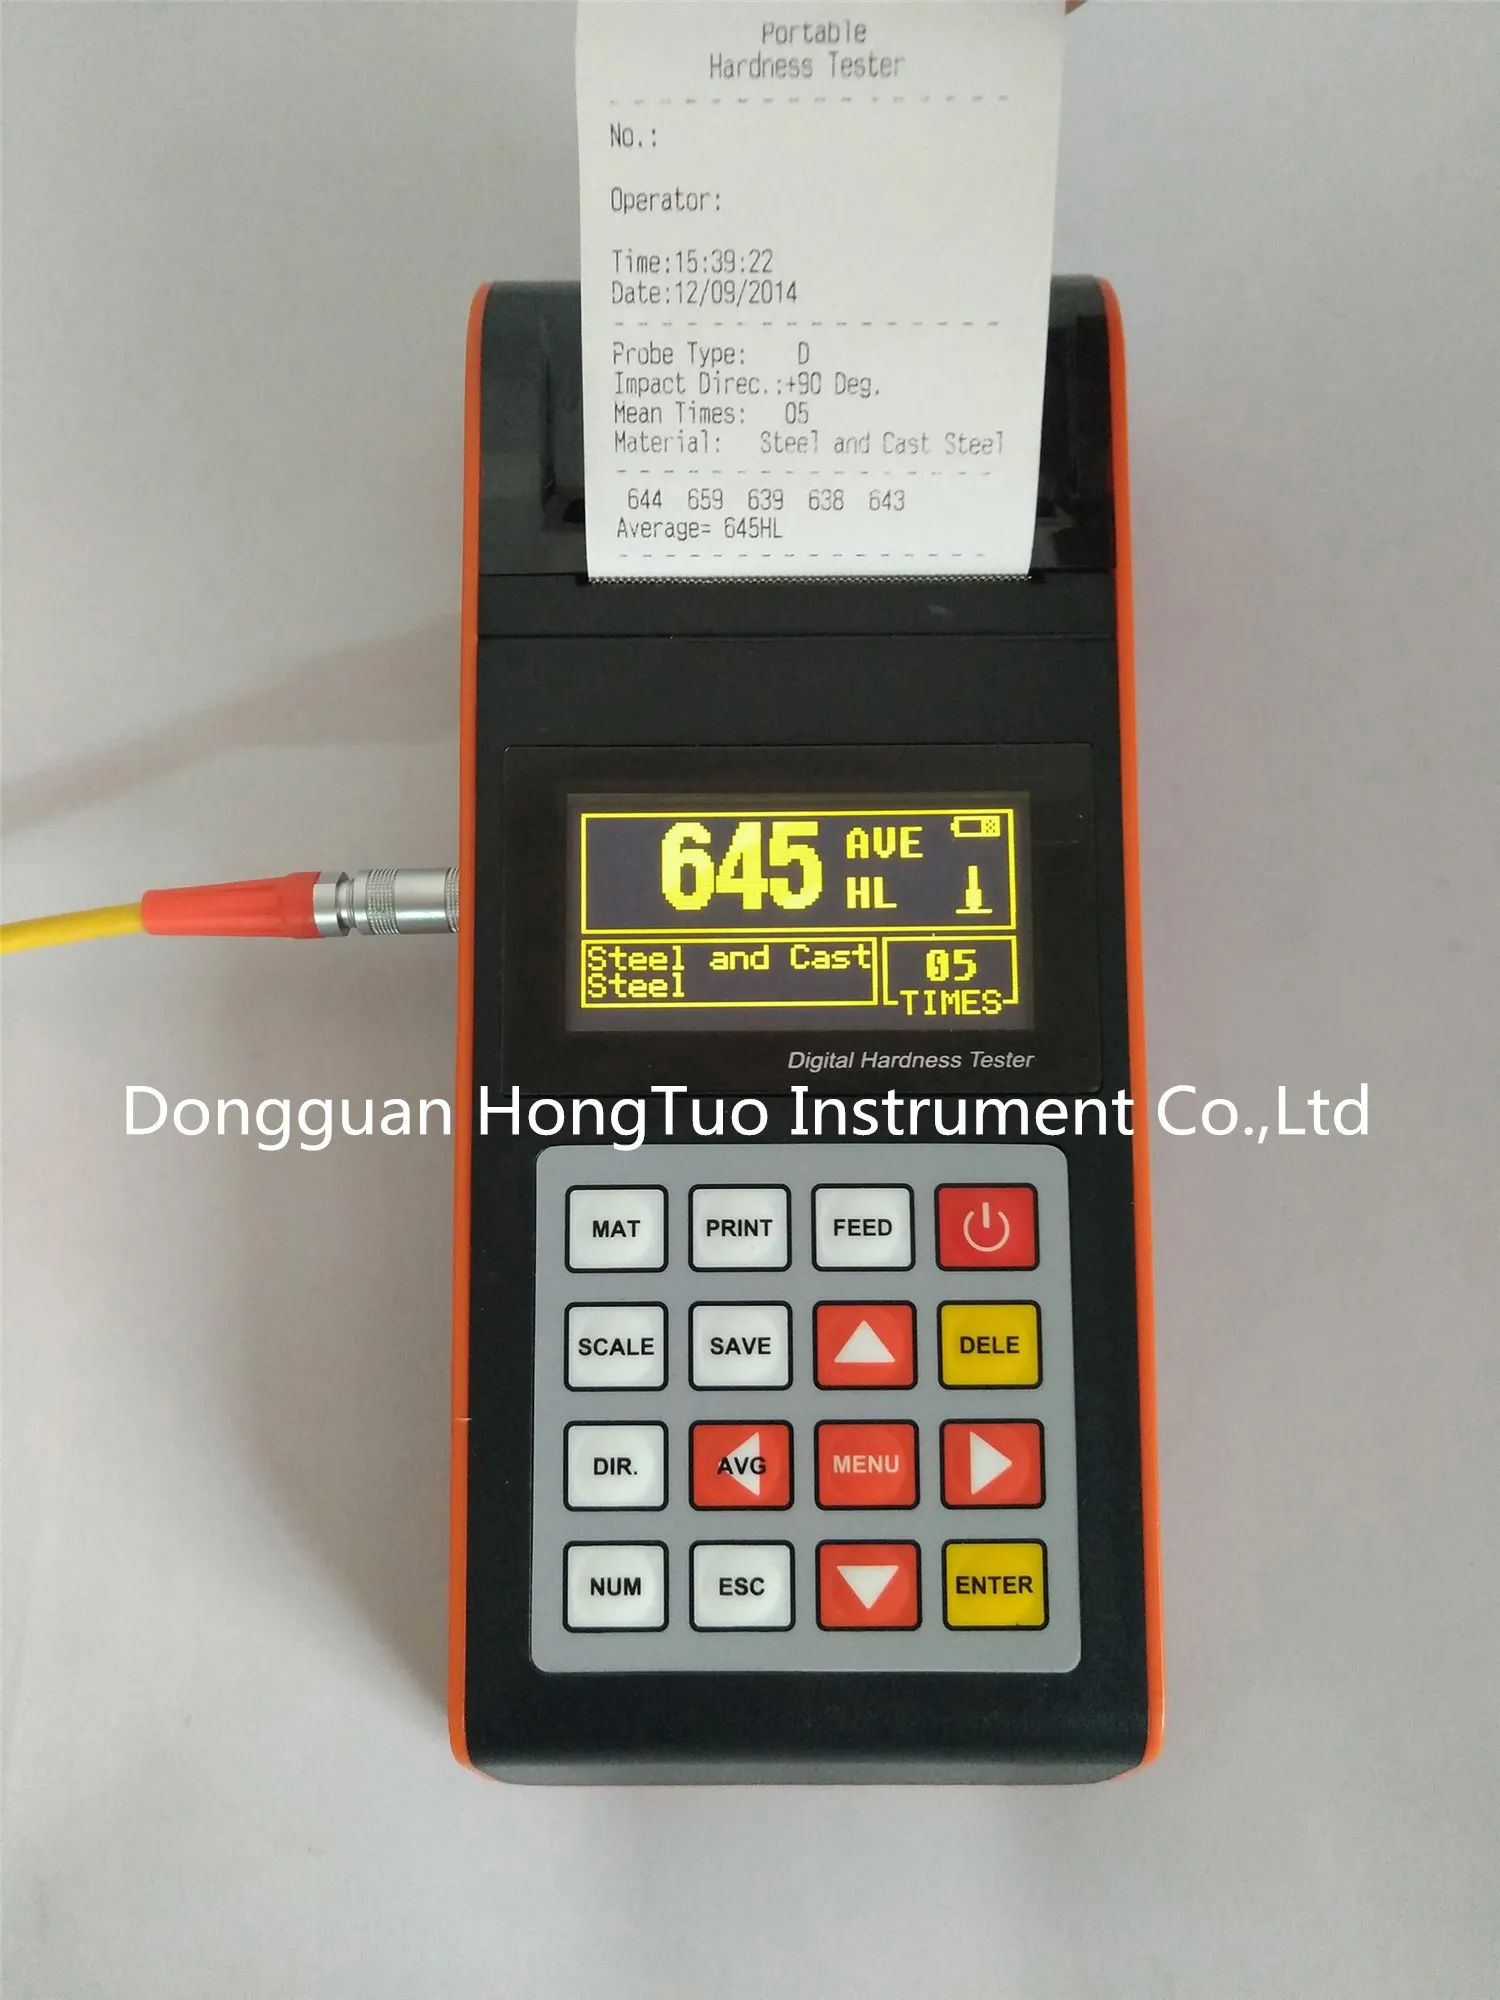 Factory Directs Hardness Tester Price,Hardness Tester Digital With CE Approved